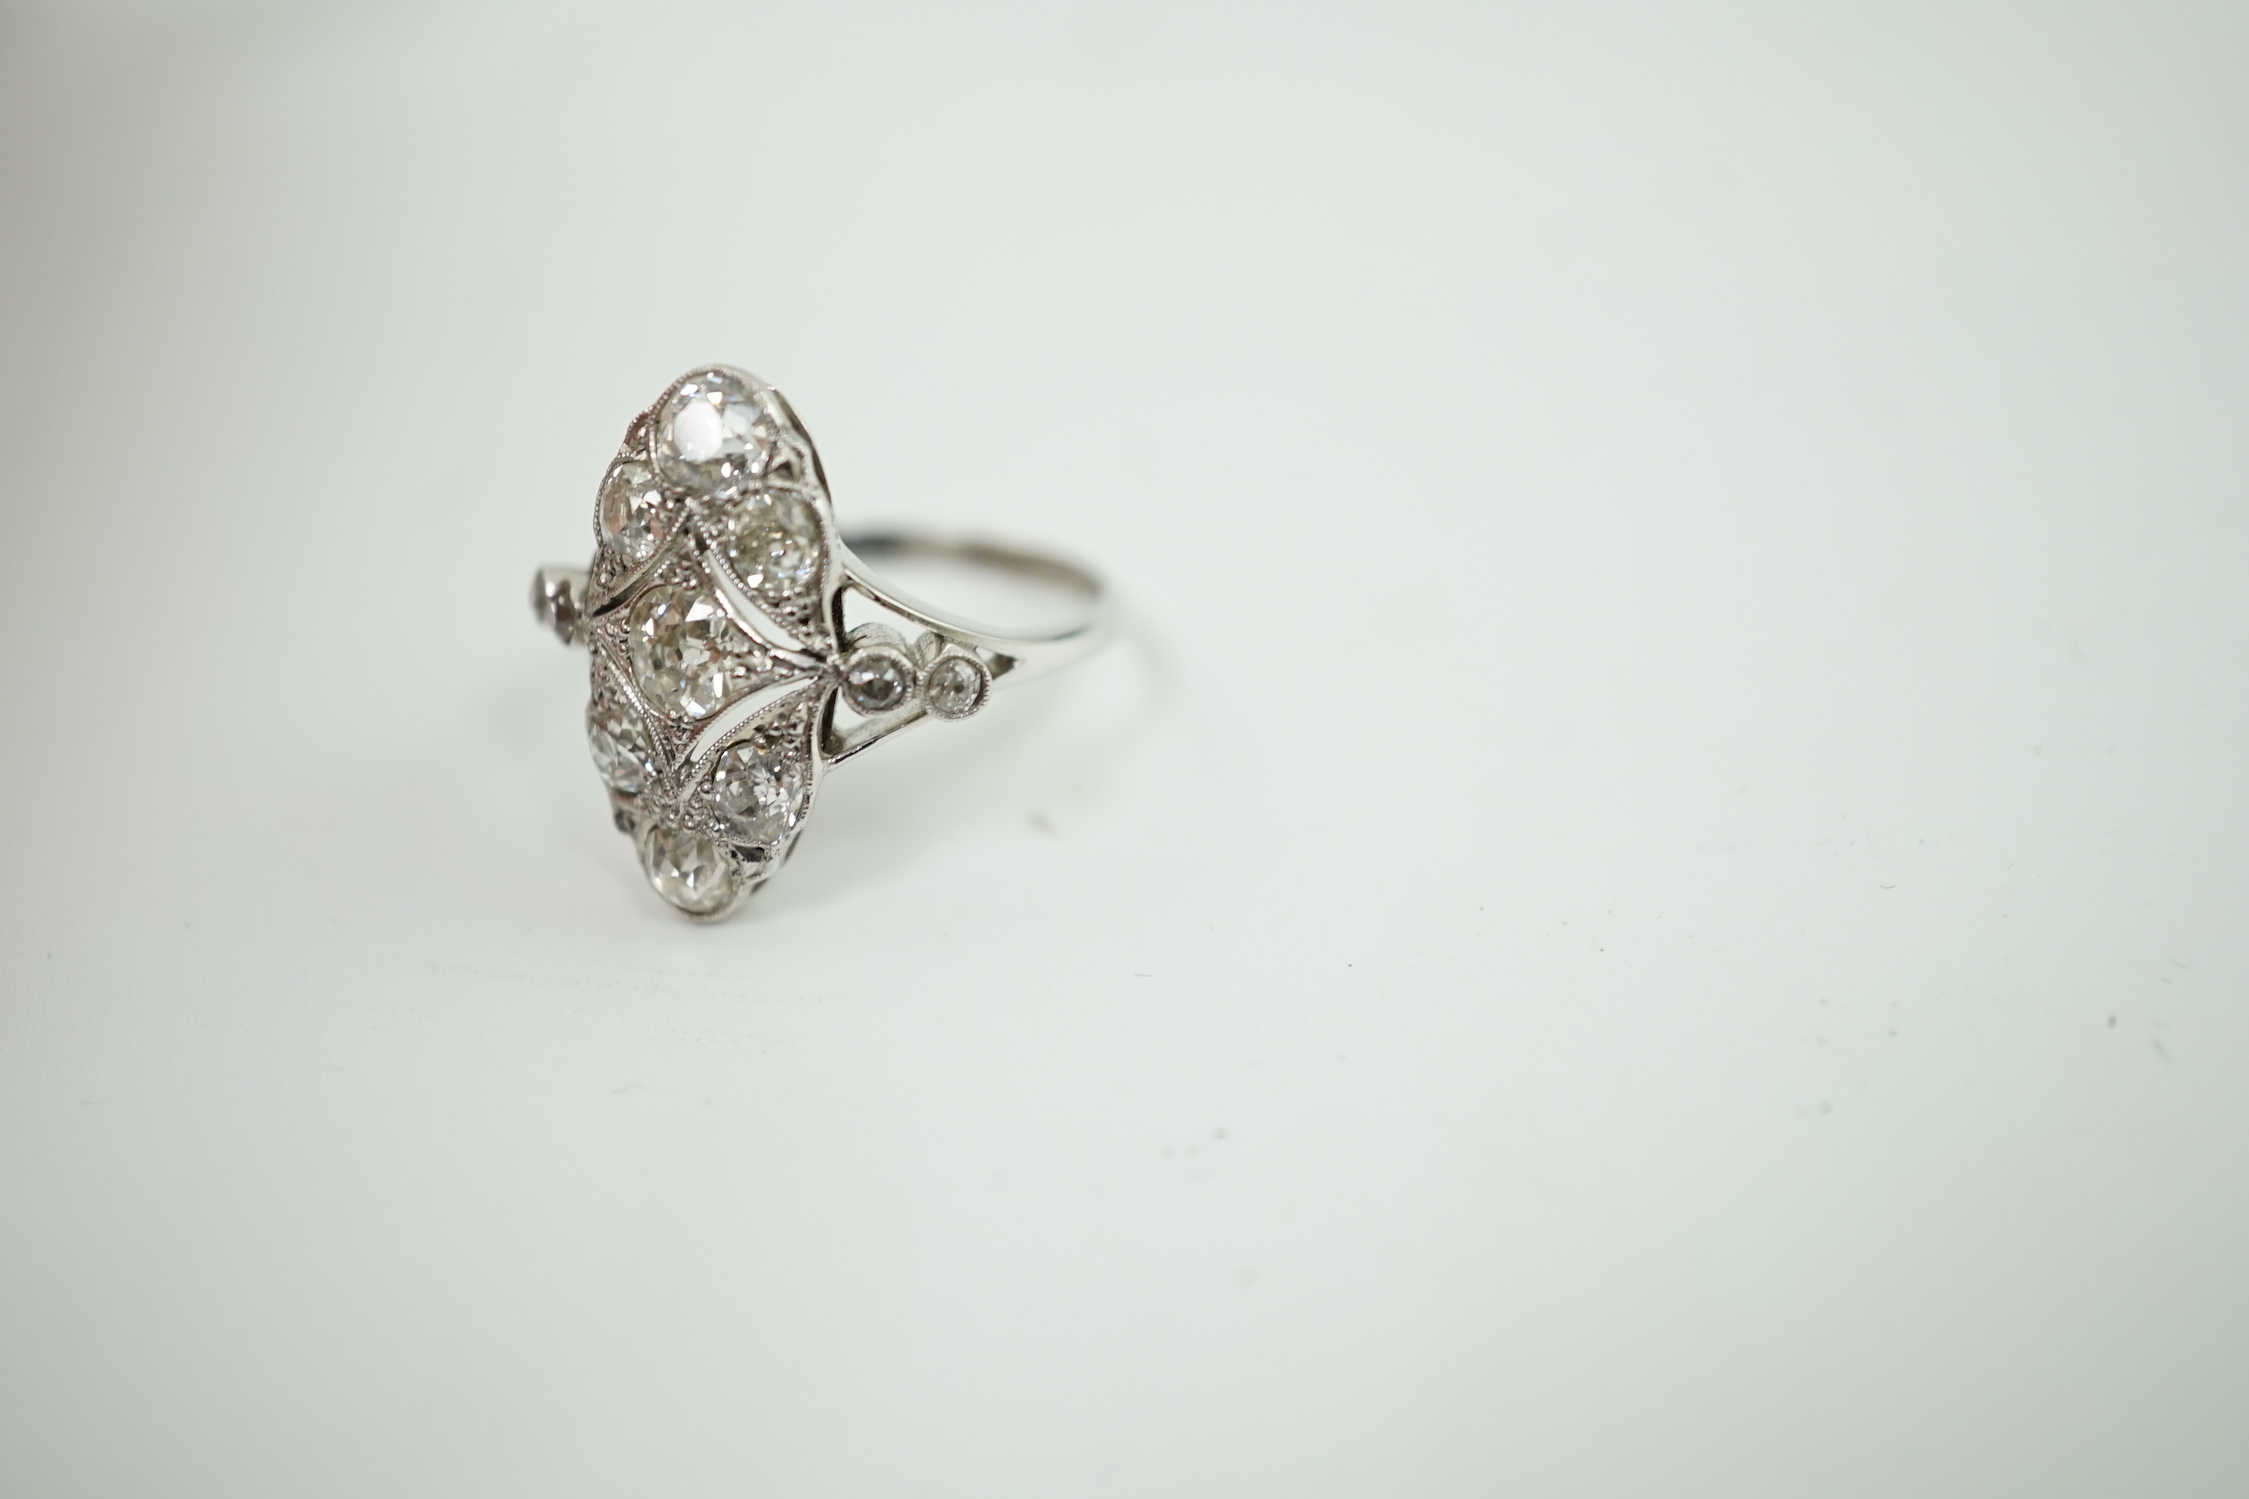 An early 20th century 18ct white gold, platinum and millegrain set old cut diamond cluster ring